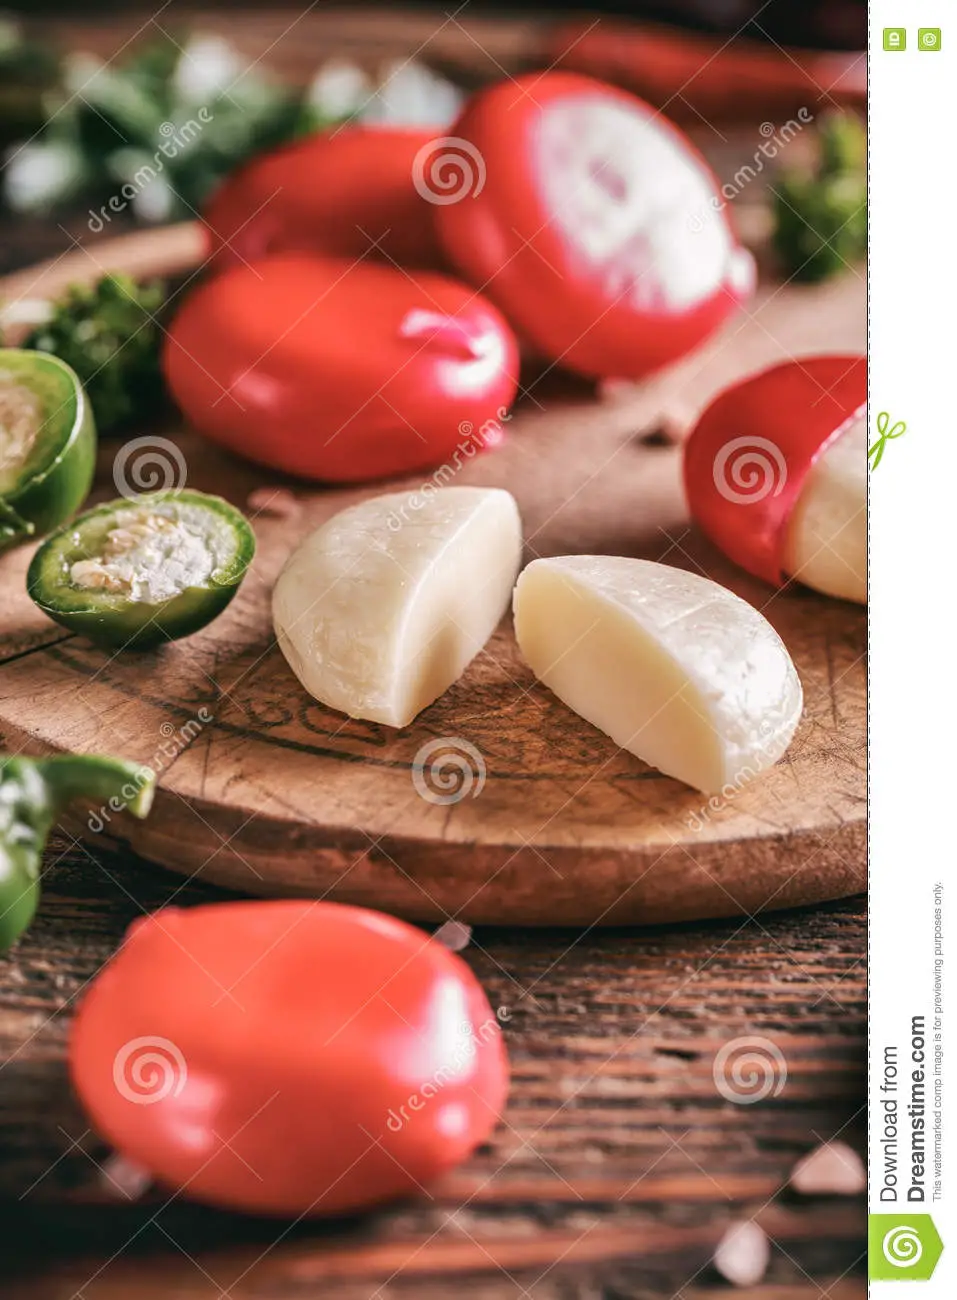 Babybel cheese in red wax stock image. Image of wooden